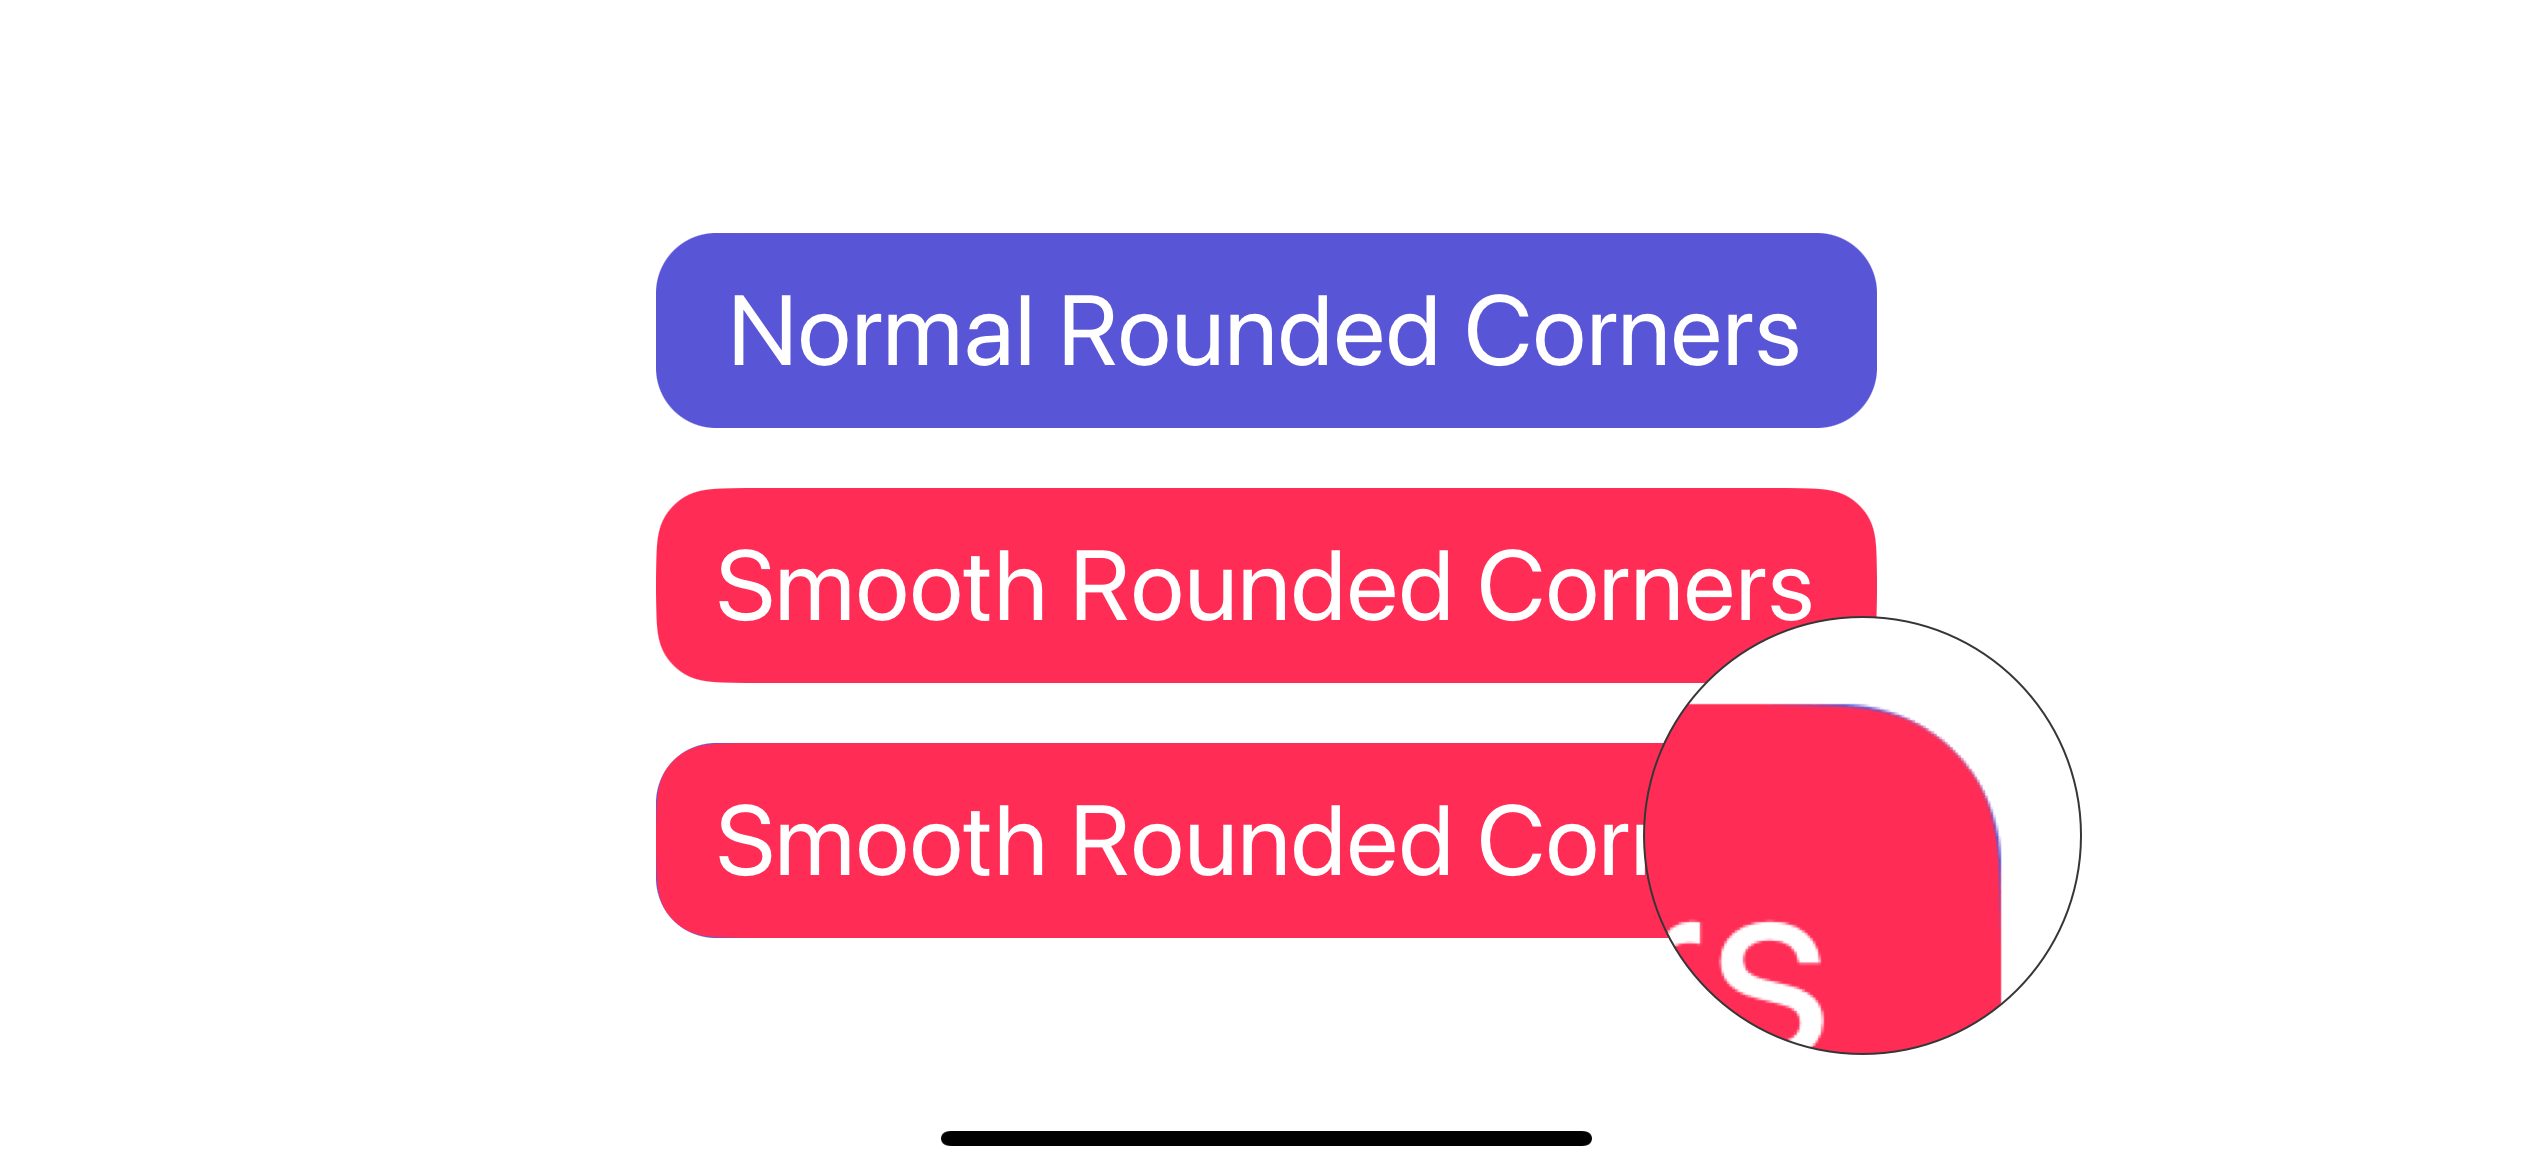 A comparison between normal rounded corners and continuous corners.